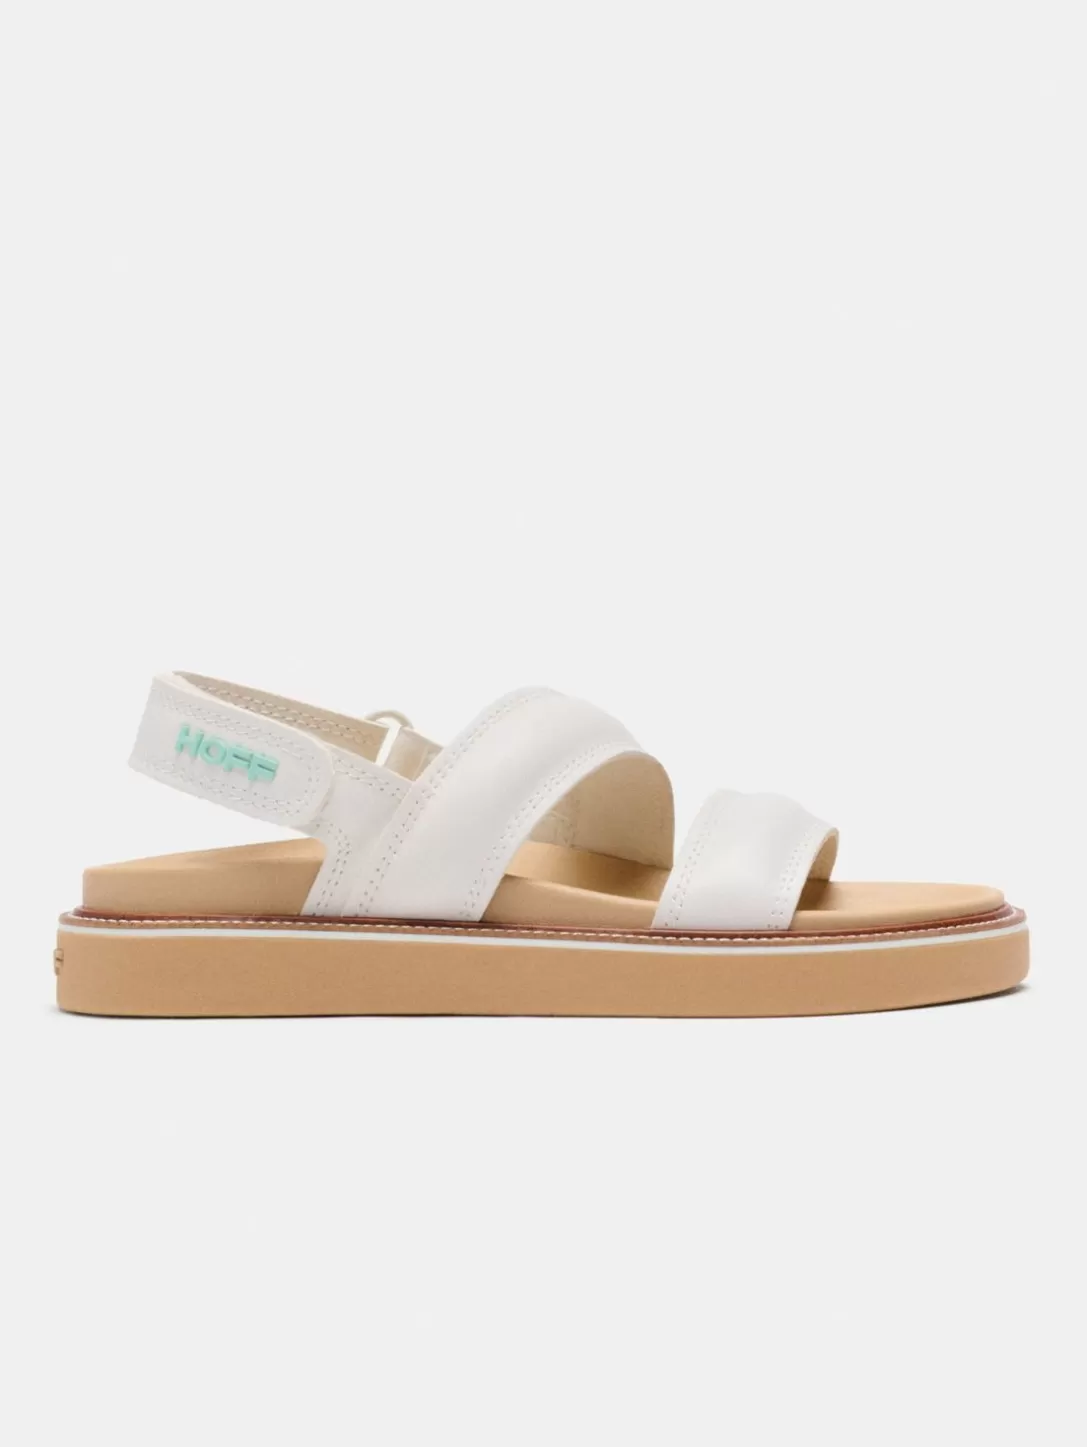 HOFF Sandal Leather Road Off White Hot